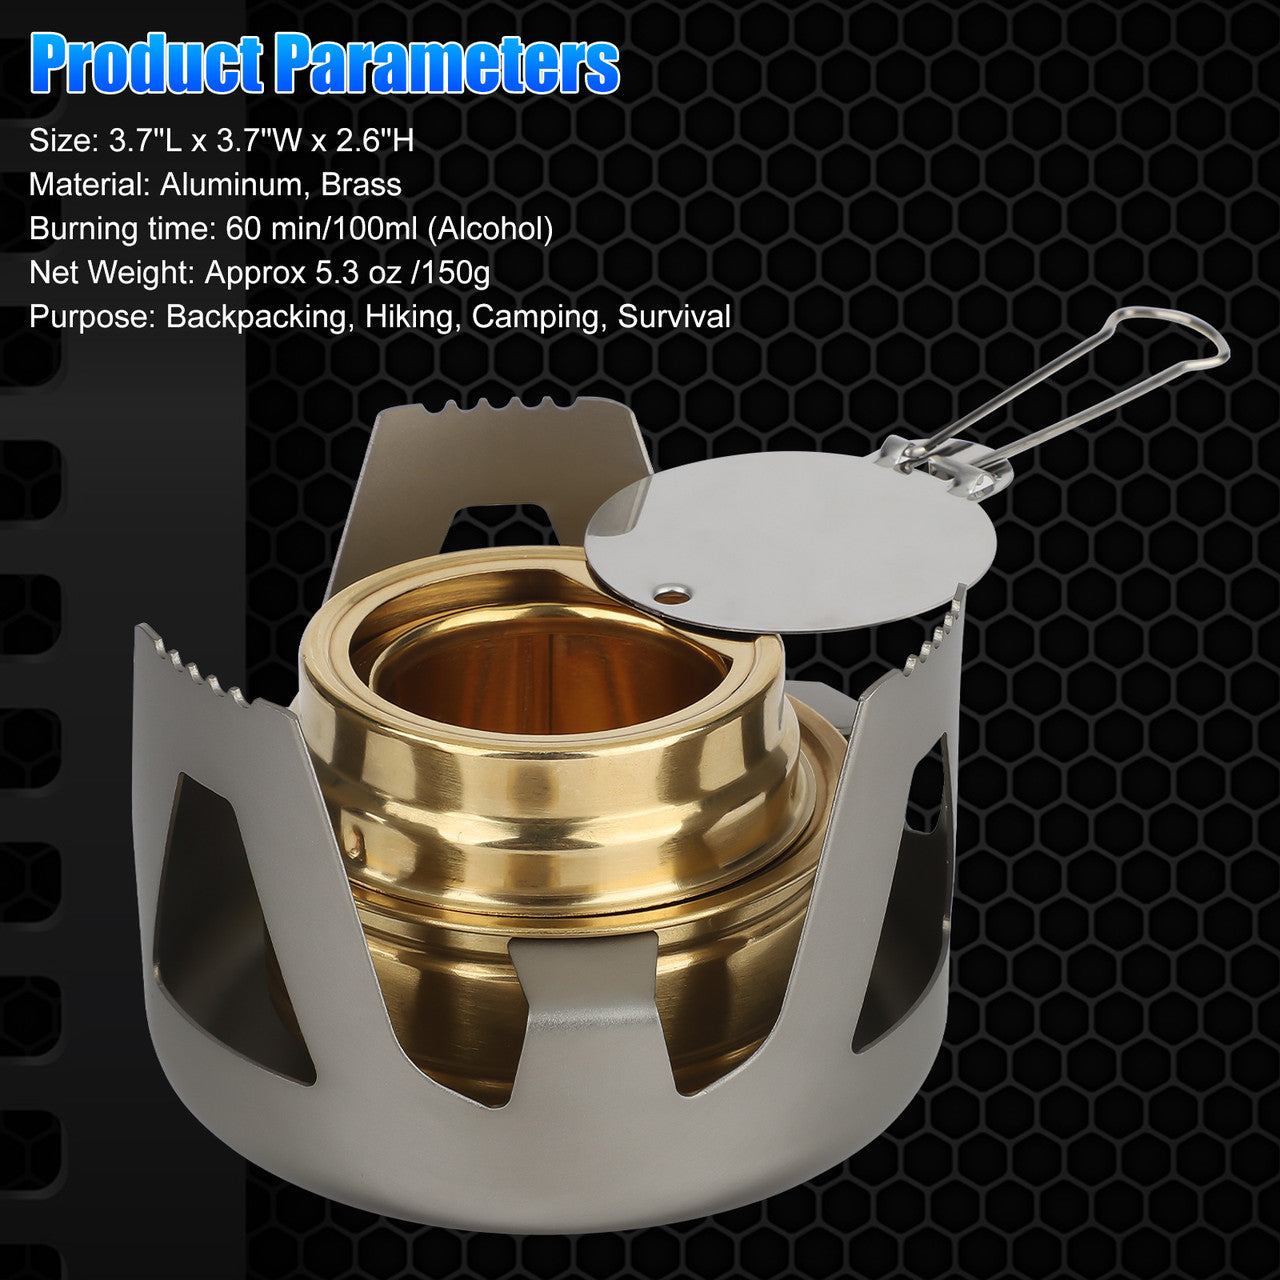 Outdoor Mini Portable Alcohol Stove Burner - Aluminum alloy stove stand and brass alcohol burner for Backpacking,Camping,Hiking